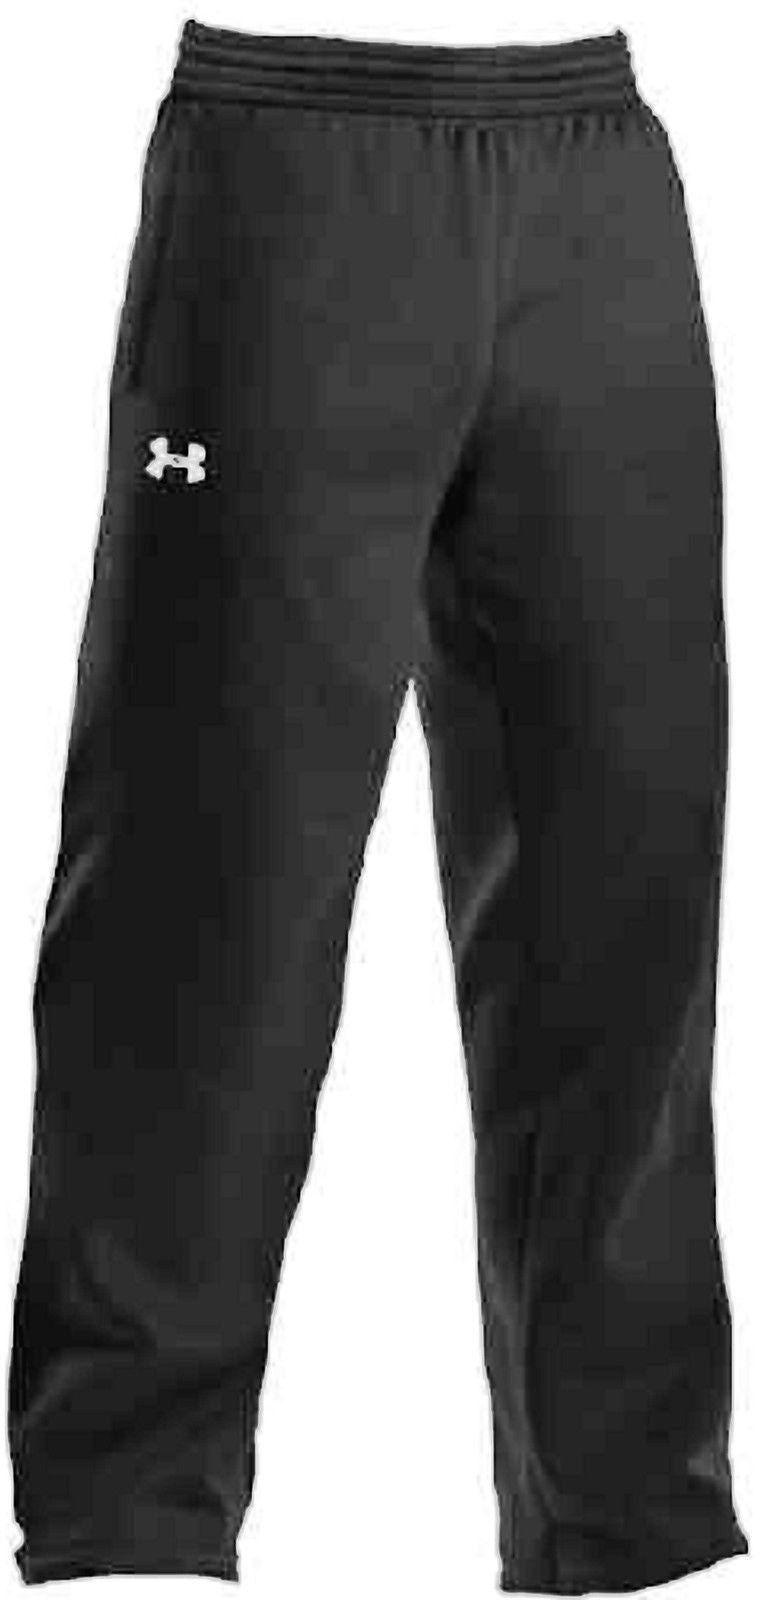 under armour lined pants